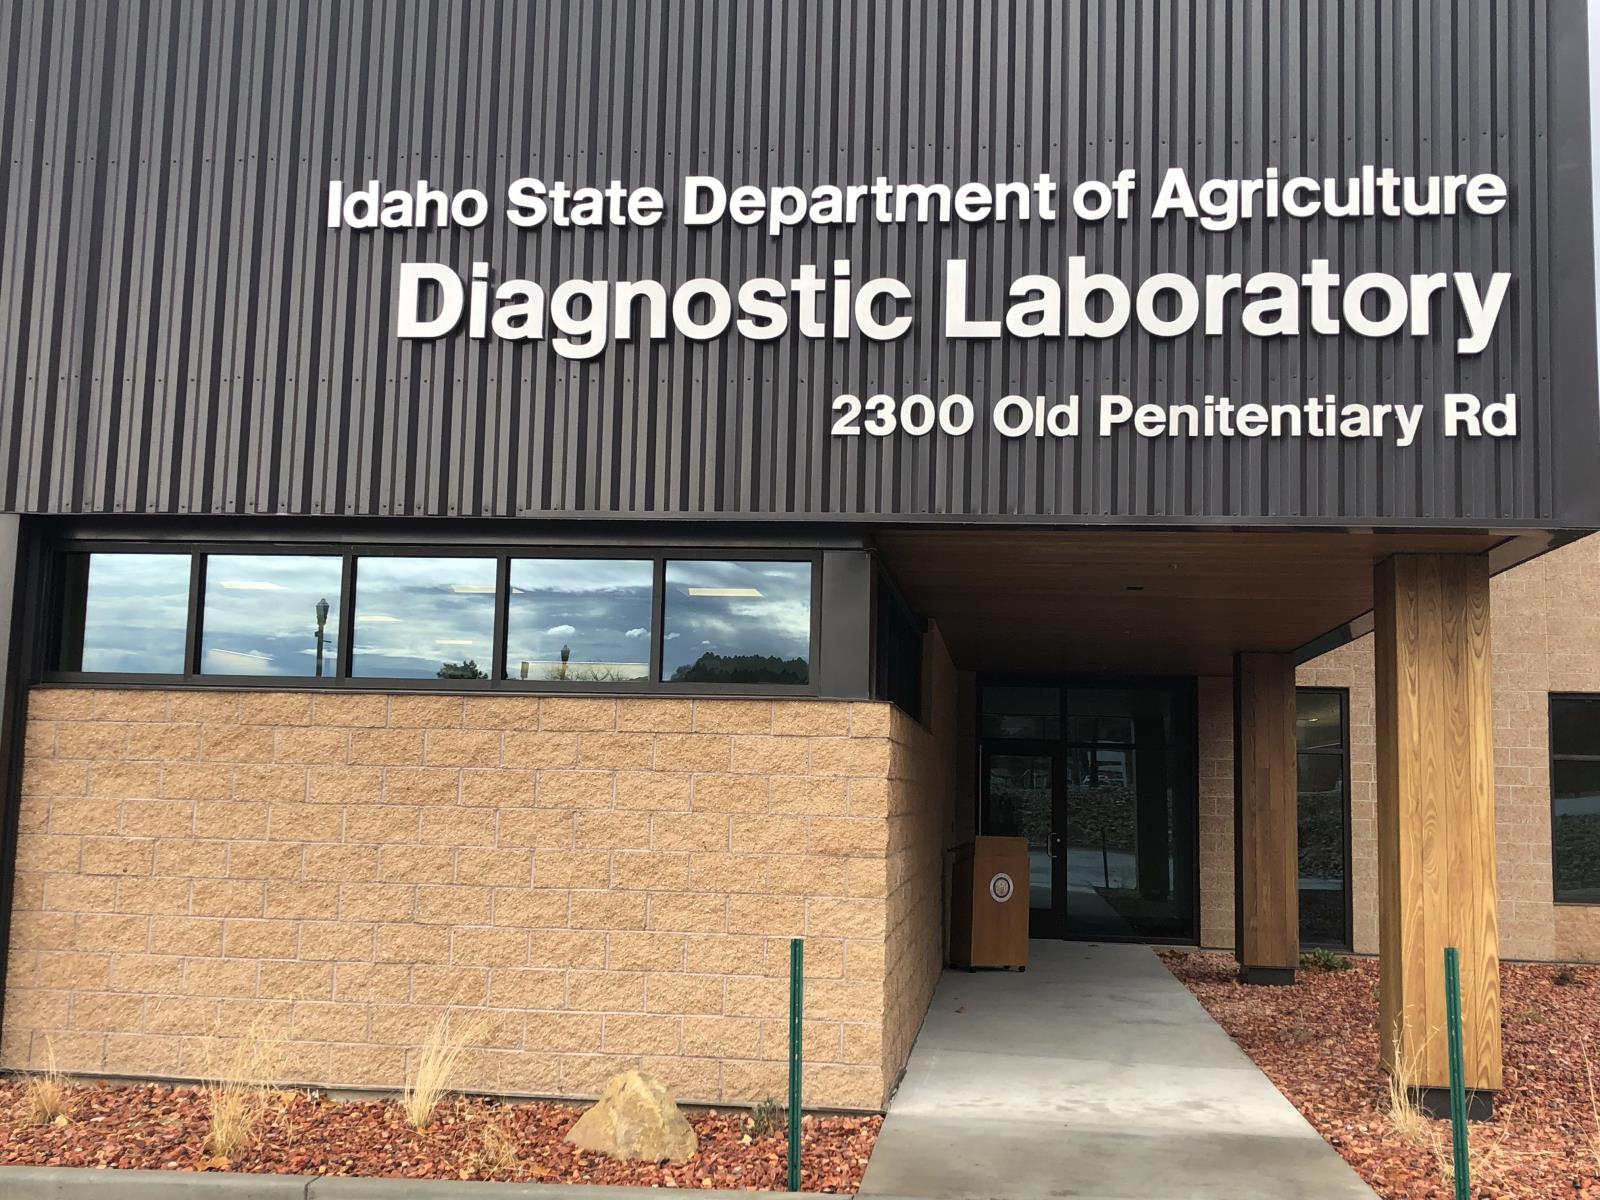 The Idaho State Department of Agriculture is opening this new, state-of-the-art laboratory that serves an important role in ensuring public, animal and plant health in the state.